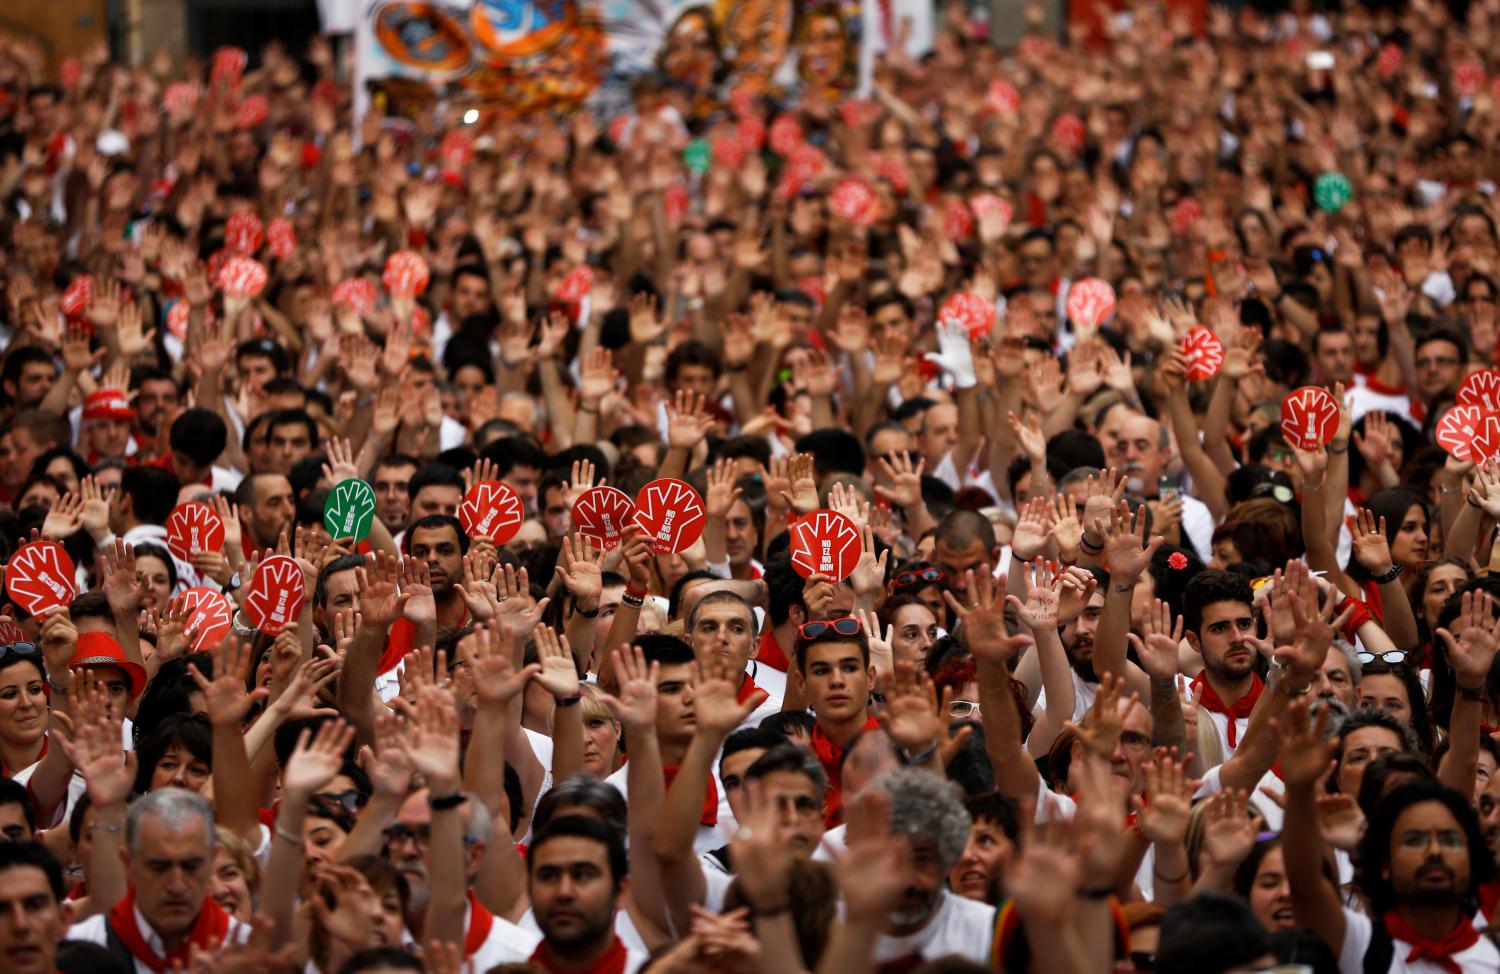 People take part in a protest against sexual violence against women during the San Fermin festival in Pamplona, northern Spain, July 7, 2016. REUTERS/Susana Vera - S1AETOGPURAA